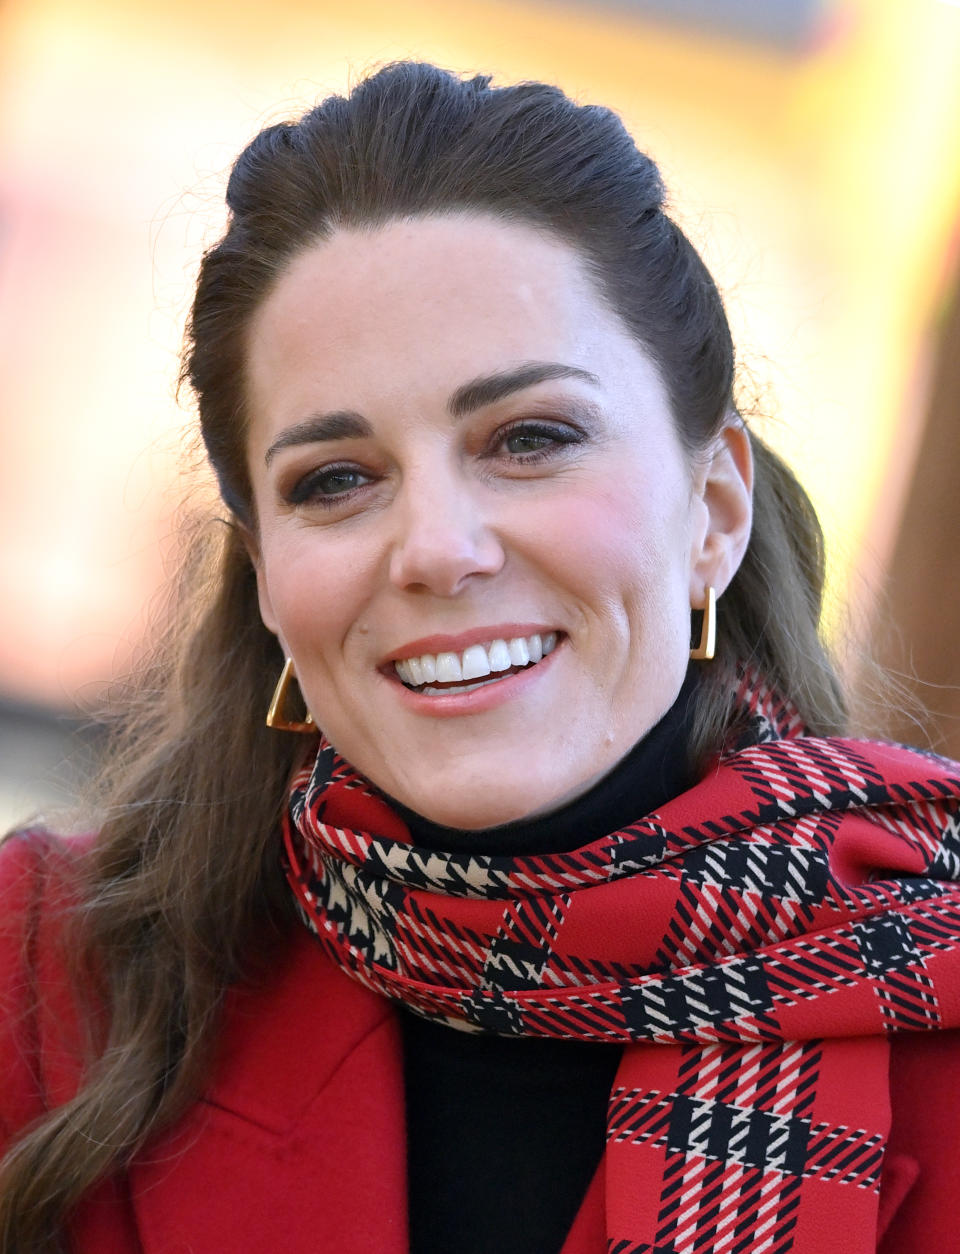 The Duchess of Cambridge also wore the 'Alia' earrings on a visit to Cardiff Castle in December 2020. (Getty Images)